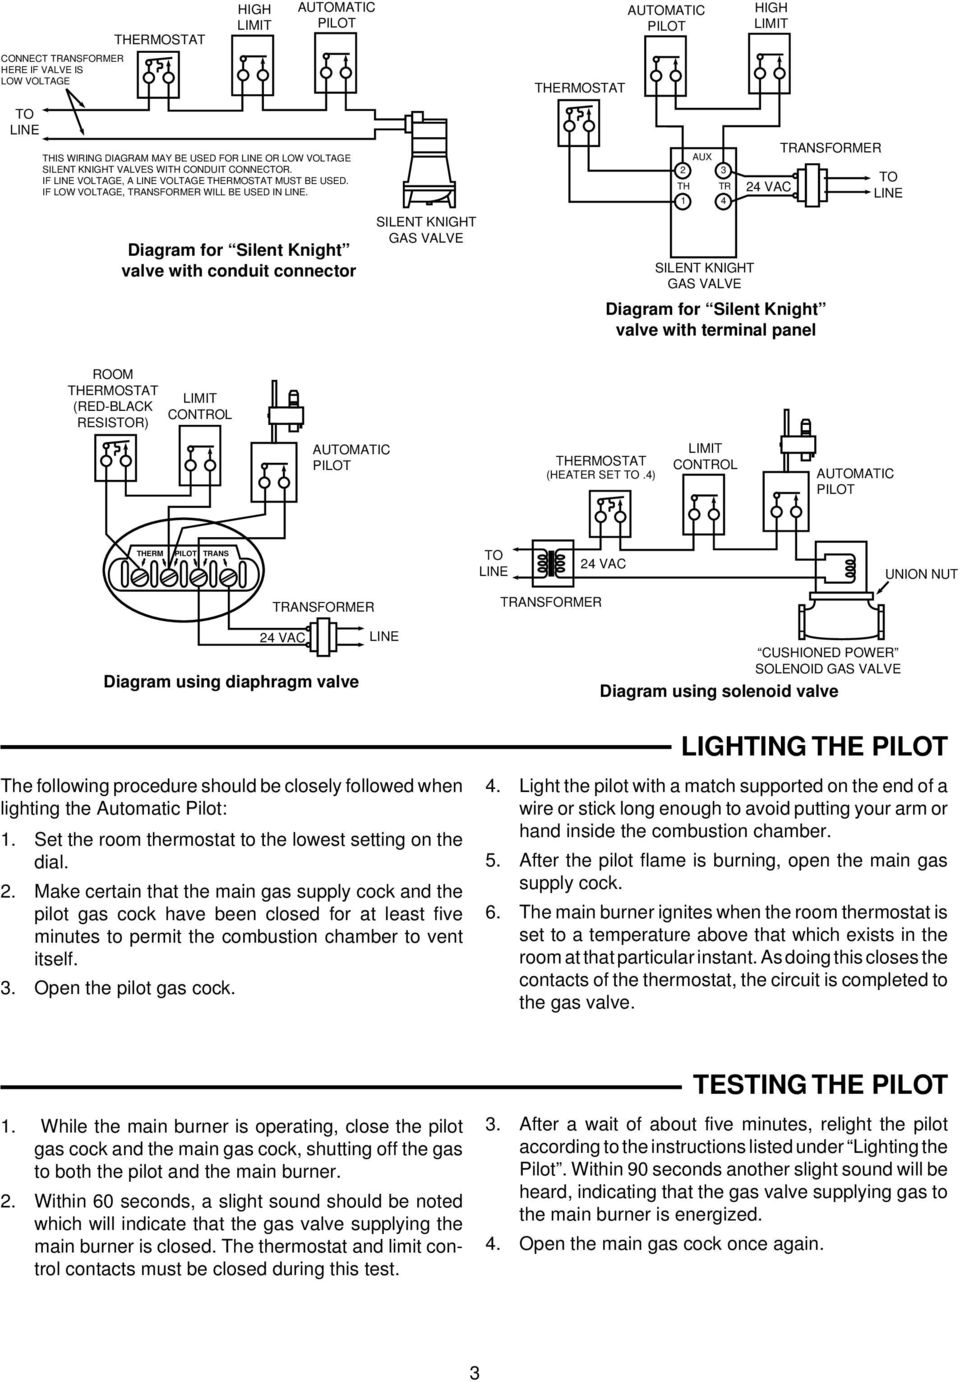 Diagram for Silent Knight valve with conduit connector SILENT KNIGHT GAS VALVE THERMOSTAT AUX 2 TH TR 1 4 HIGH 24 VAC TRANSFORMER SILENT KNIGHT GAS VALVE Diagram for Silent Knight valve with terminal